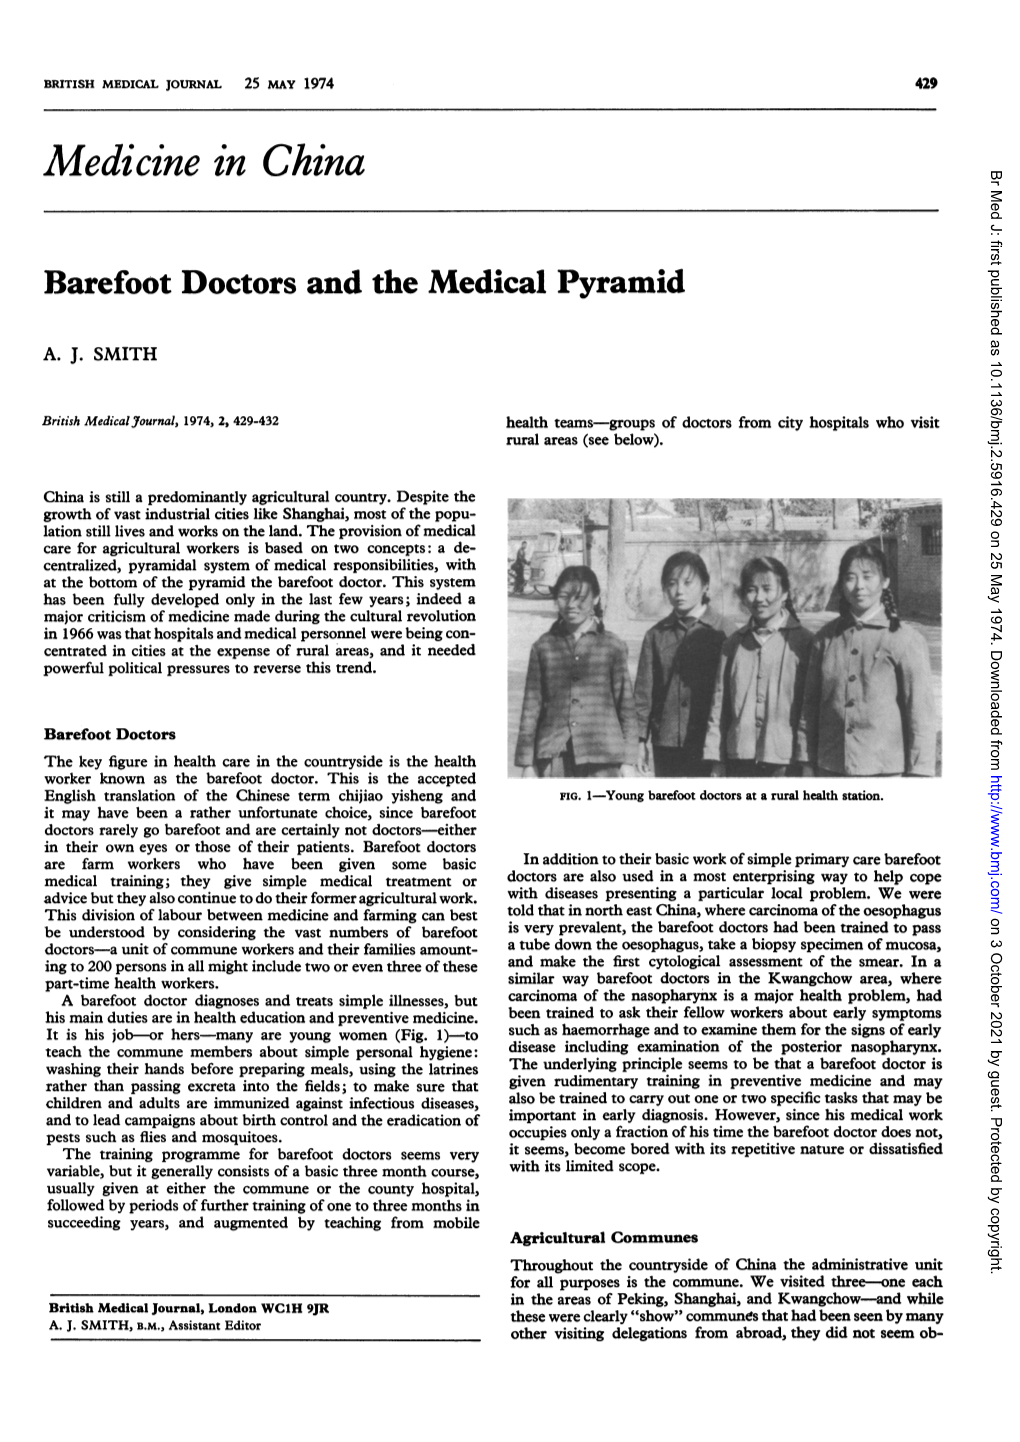 Barefoot Doctors and the Medical Pyramid